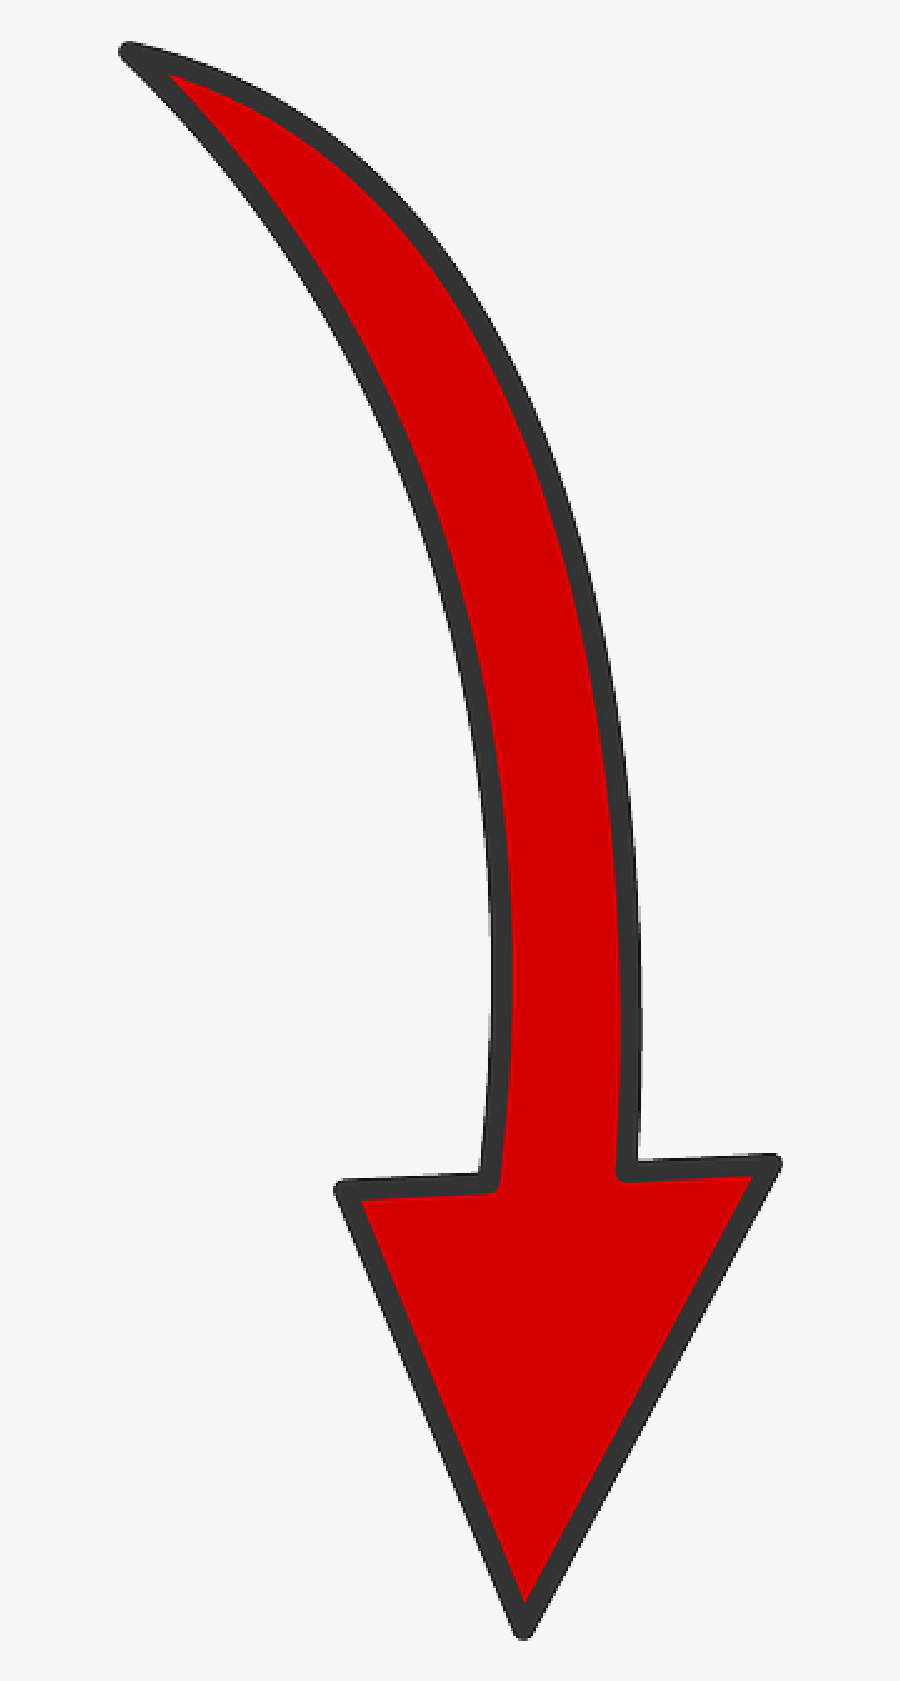 Red Curved Arrow Png , Transparent Cartoons - Red Curved Arrow Png, Transparent Clipart